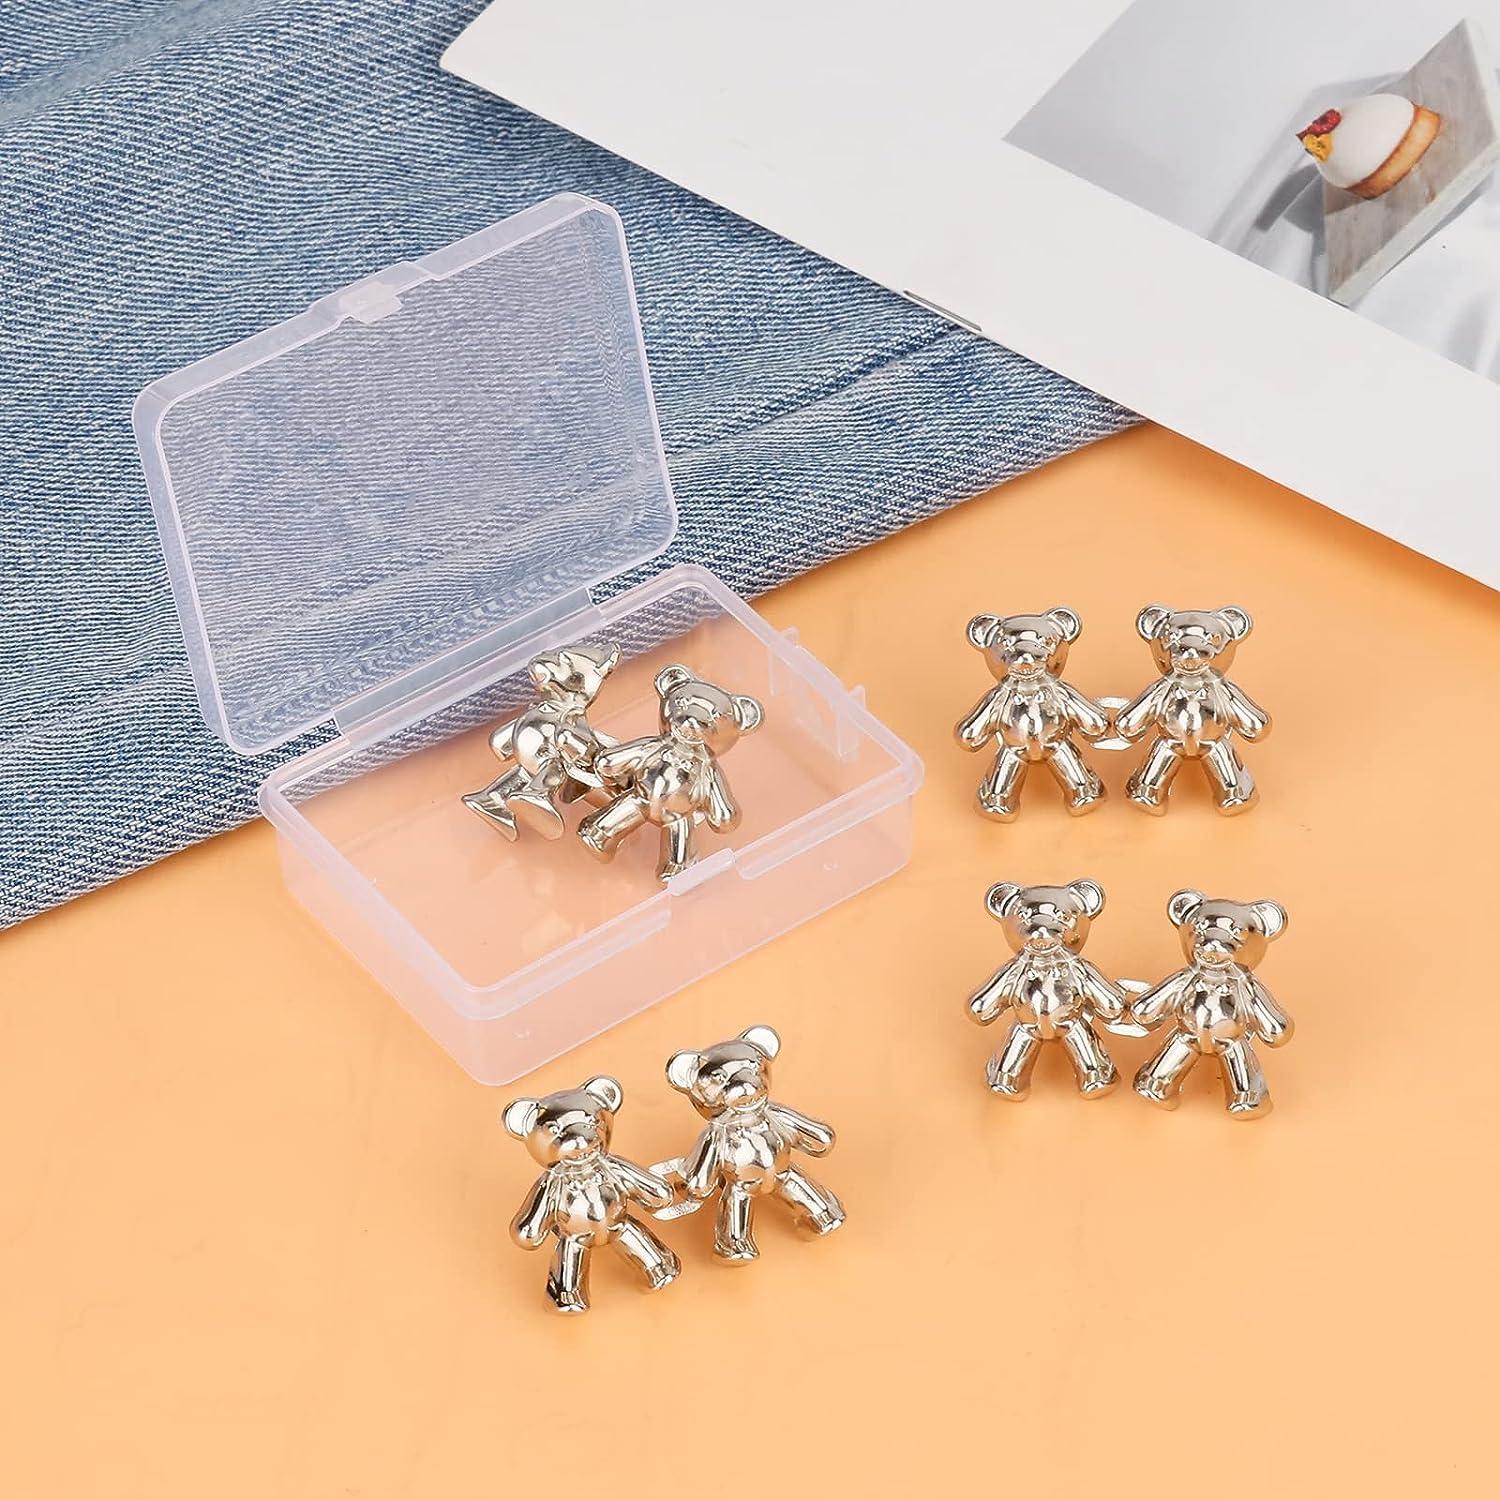  TOOVREN Upgraded 8 Sets Button Pins for Jeans Pants